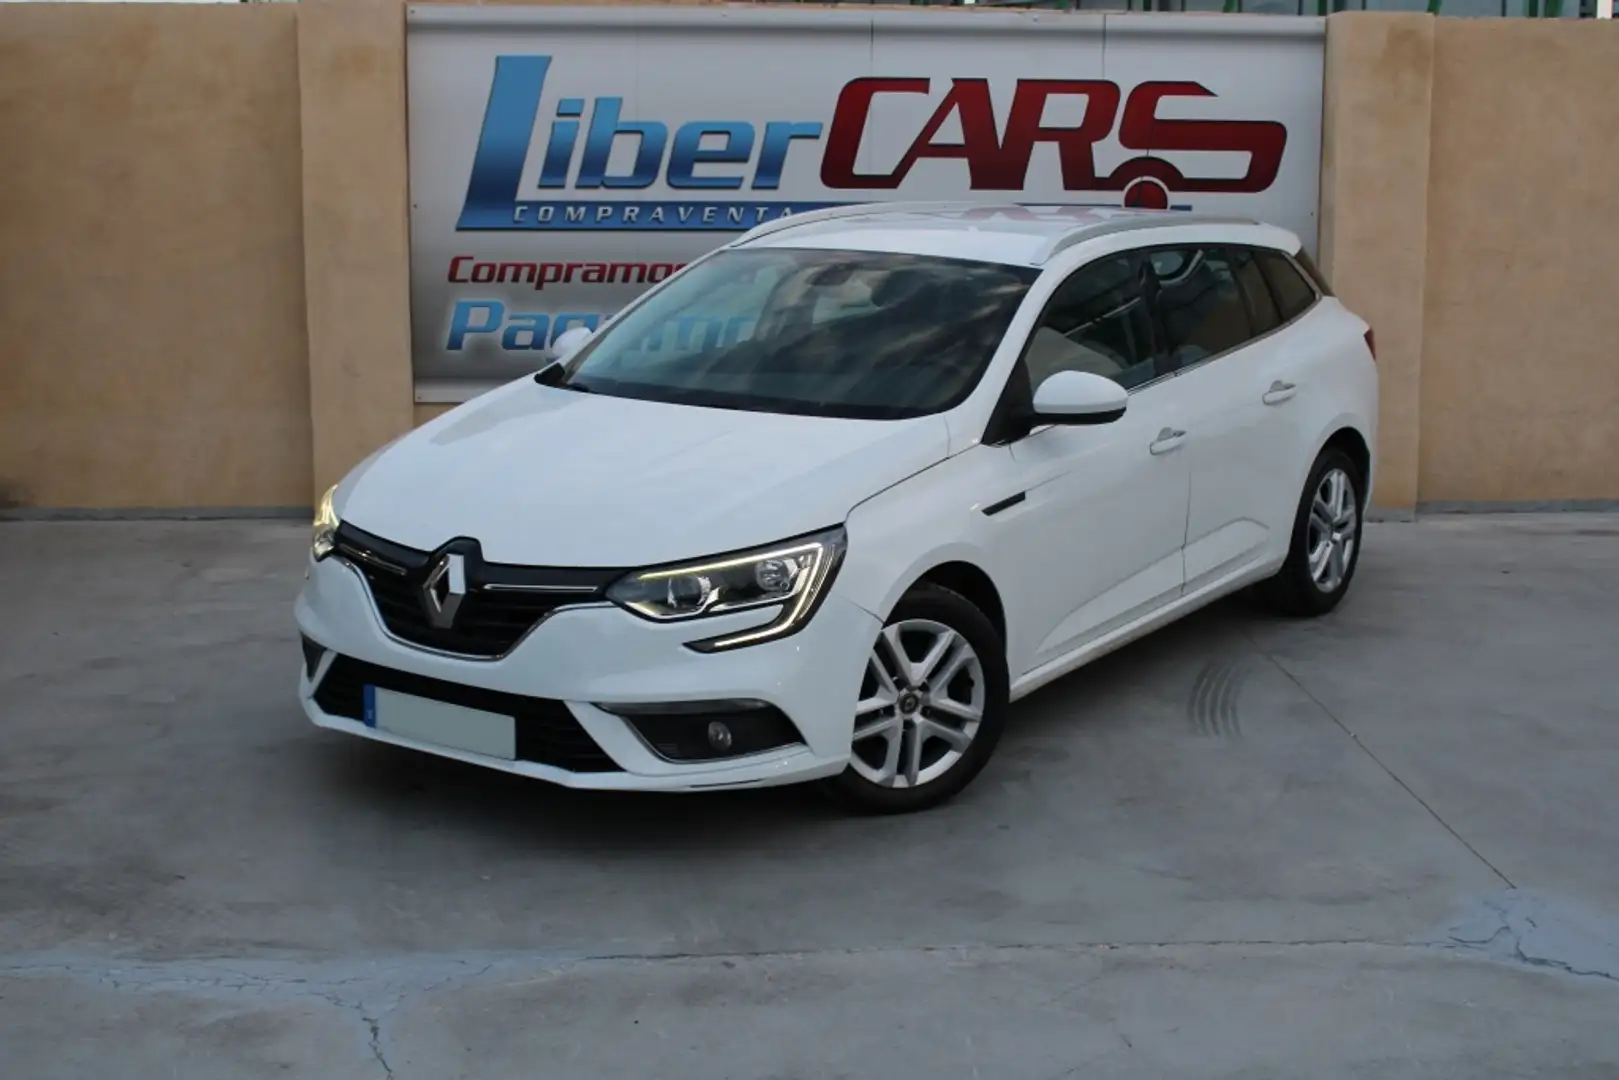 Renault Megane S.T. 1.5dCi Energy Business 81kW Blanc - 2